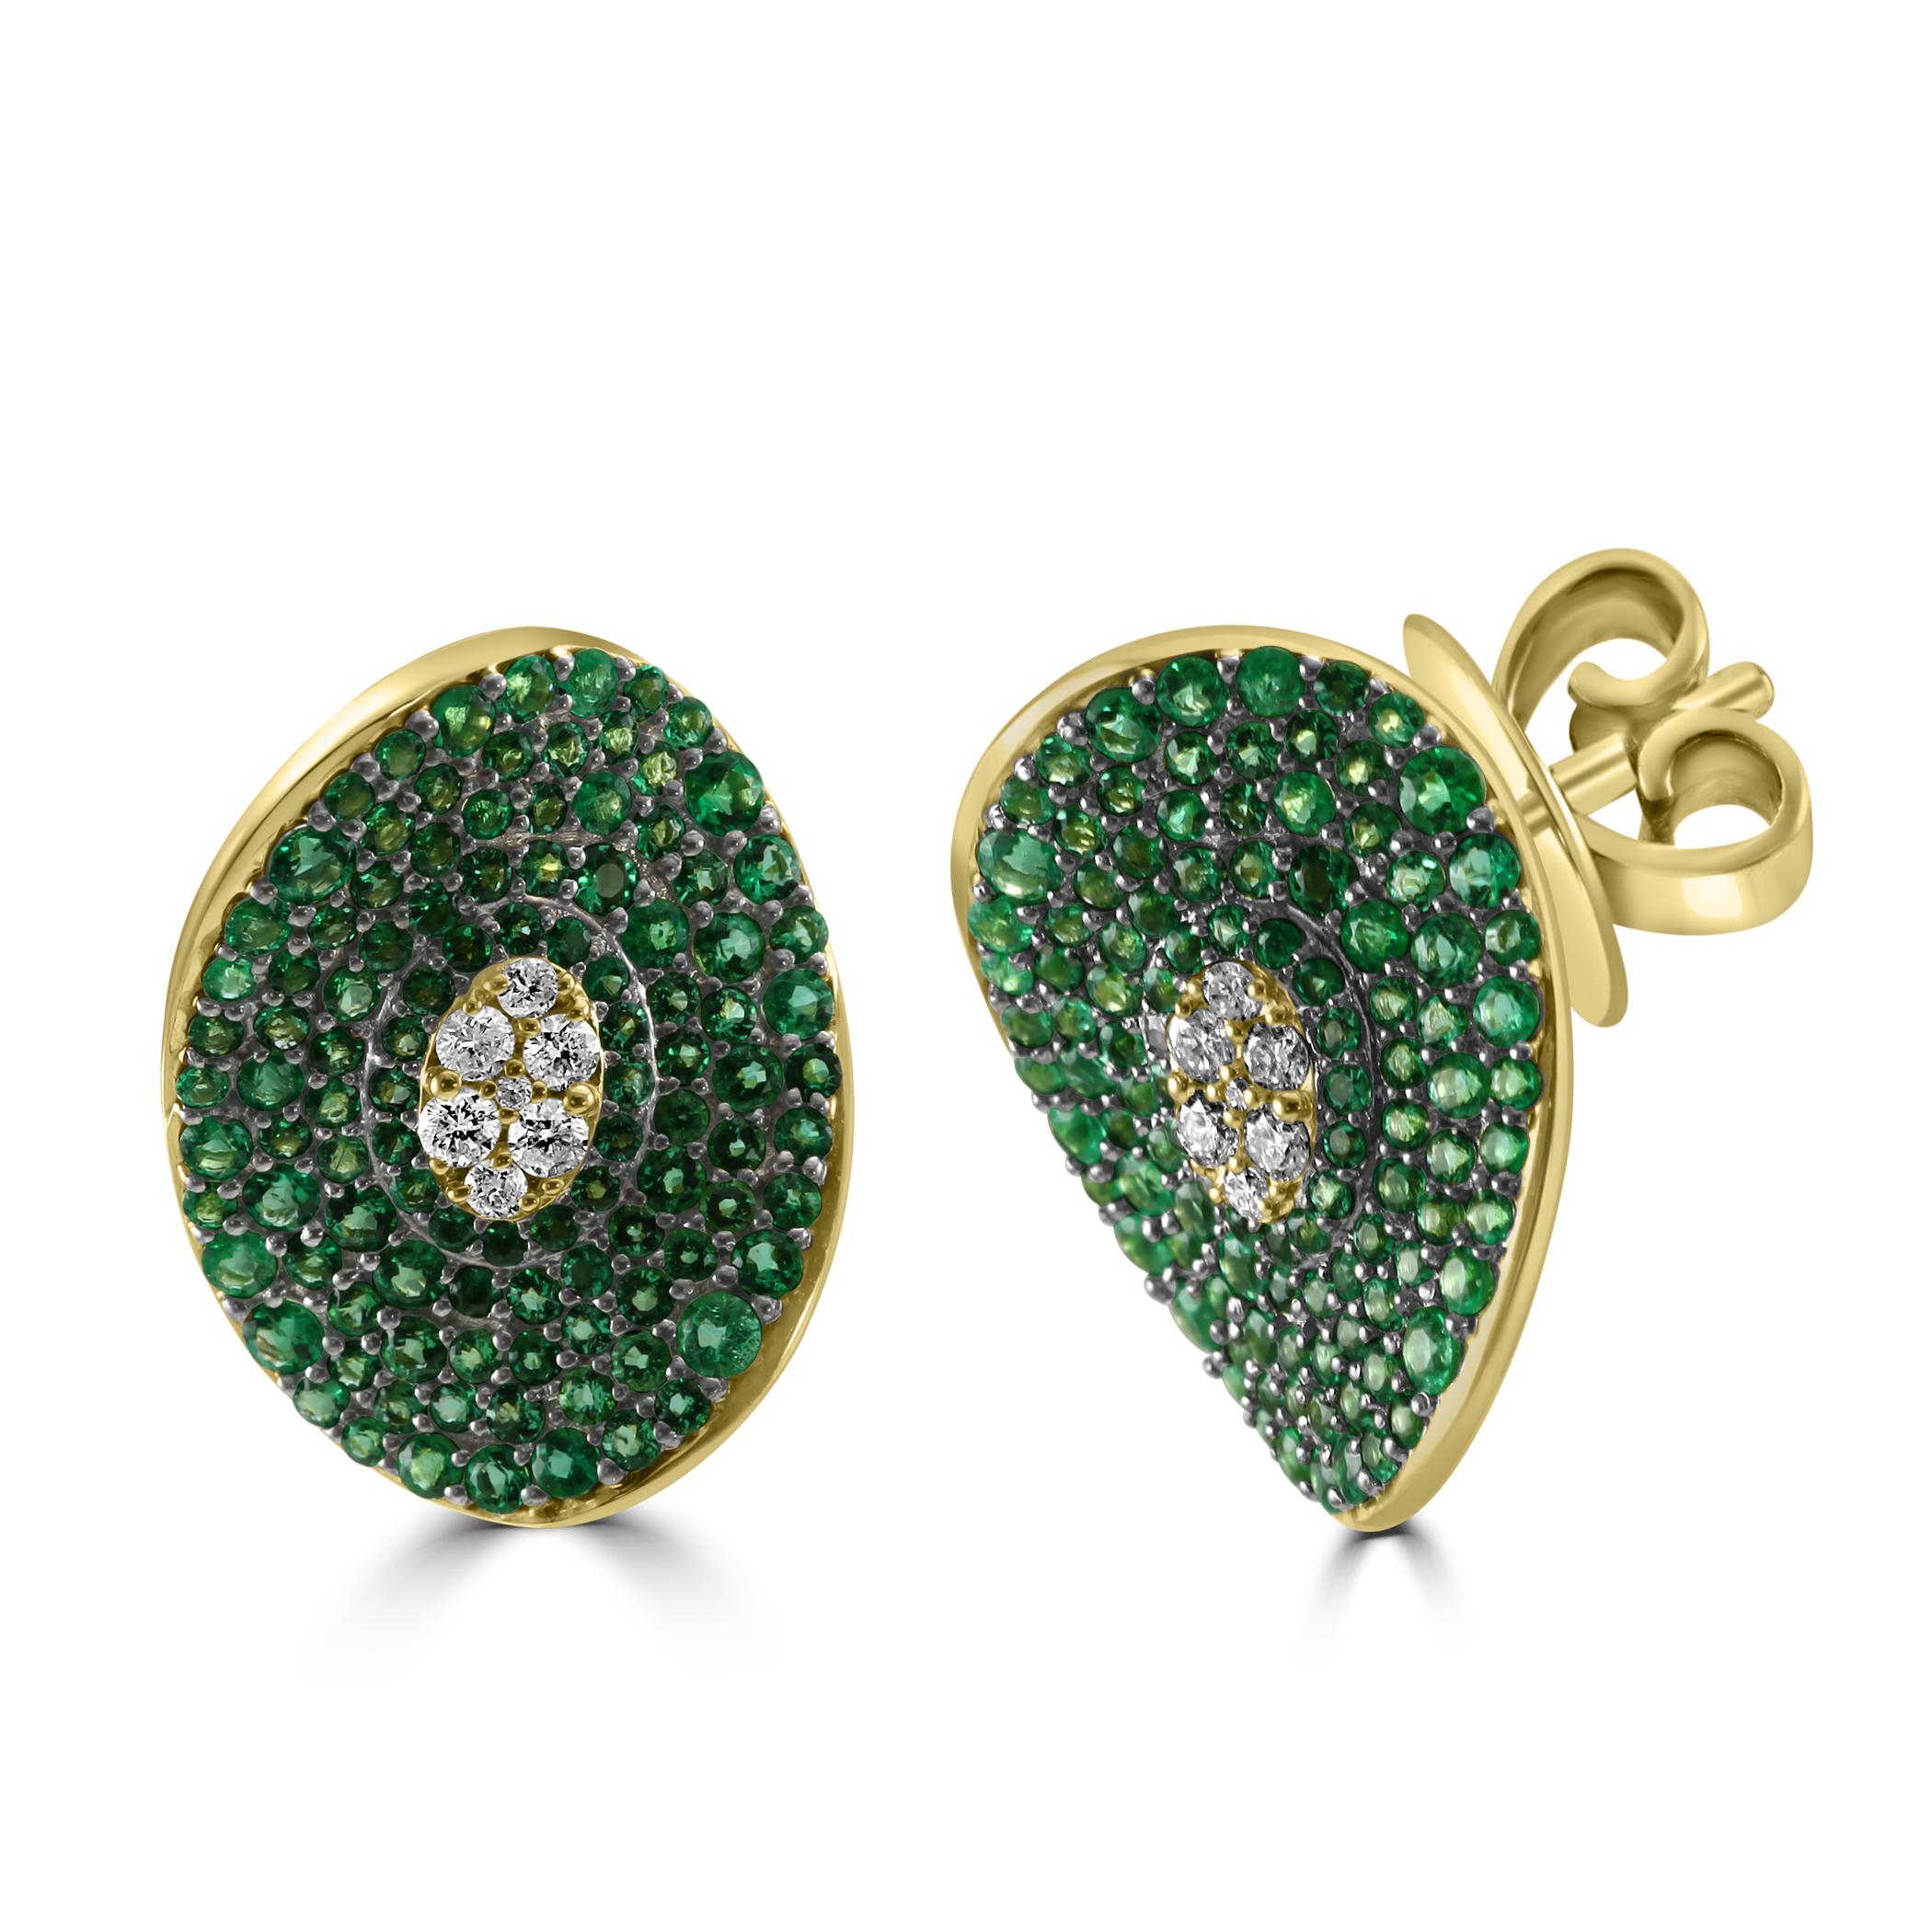 Embrace the vibrant beauty of our beautiful Emerald & Diamond earrings. This harmonious fusion of celestial sparkle and rich green hues creates a captivating pair of earrings that exude elegance and sophistication.

At the heart of each earring, a